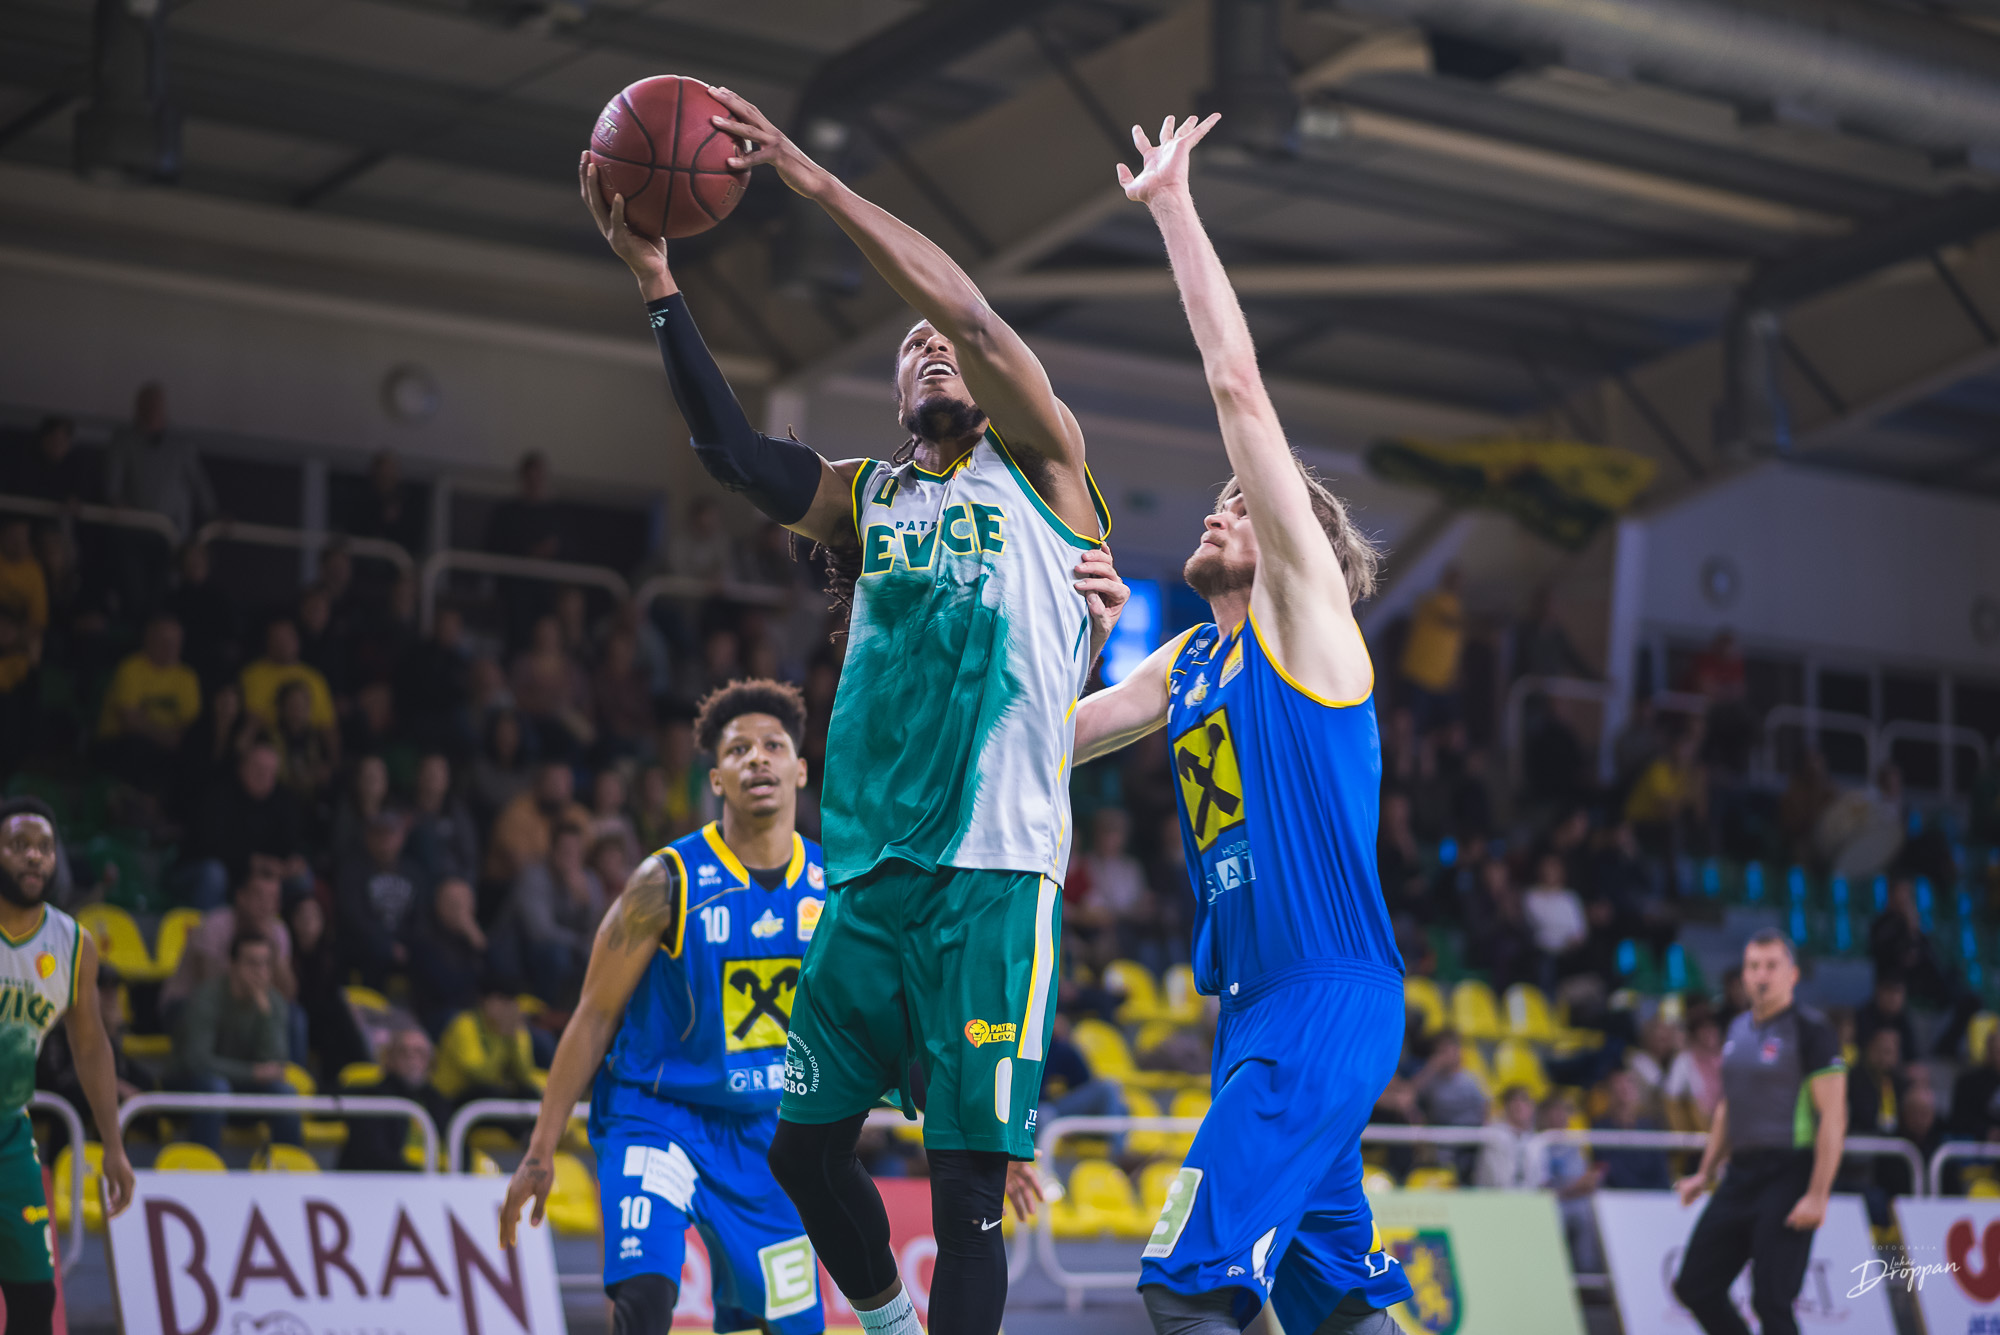 Levice secures spot in play-offs